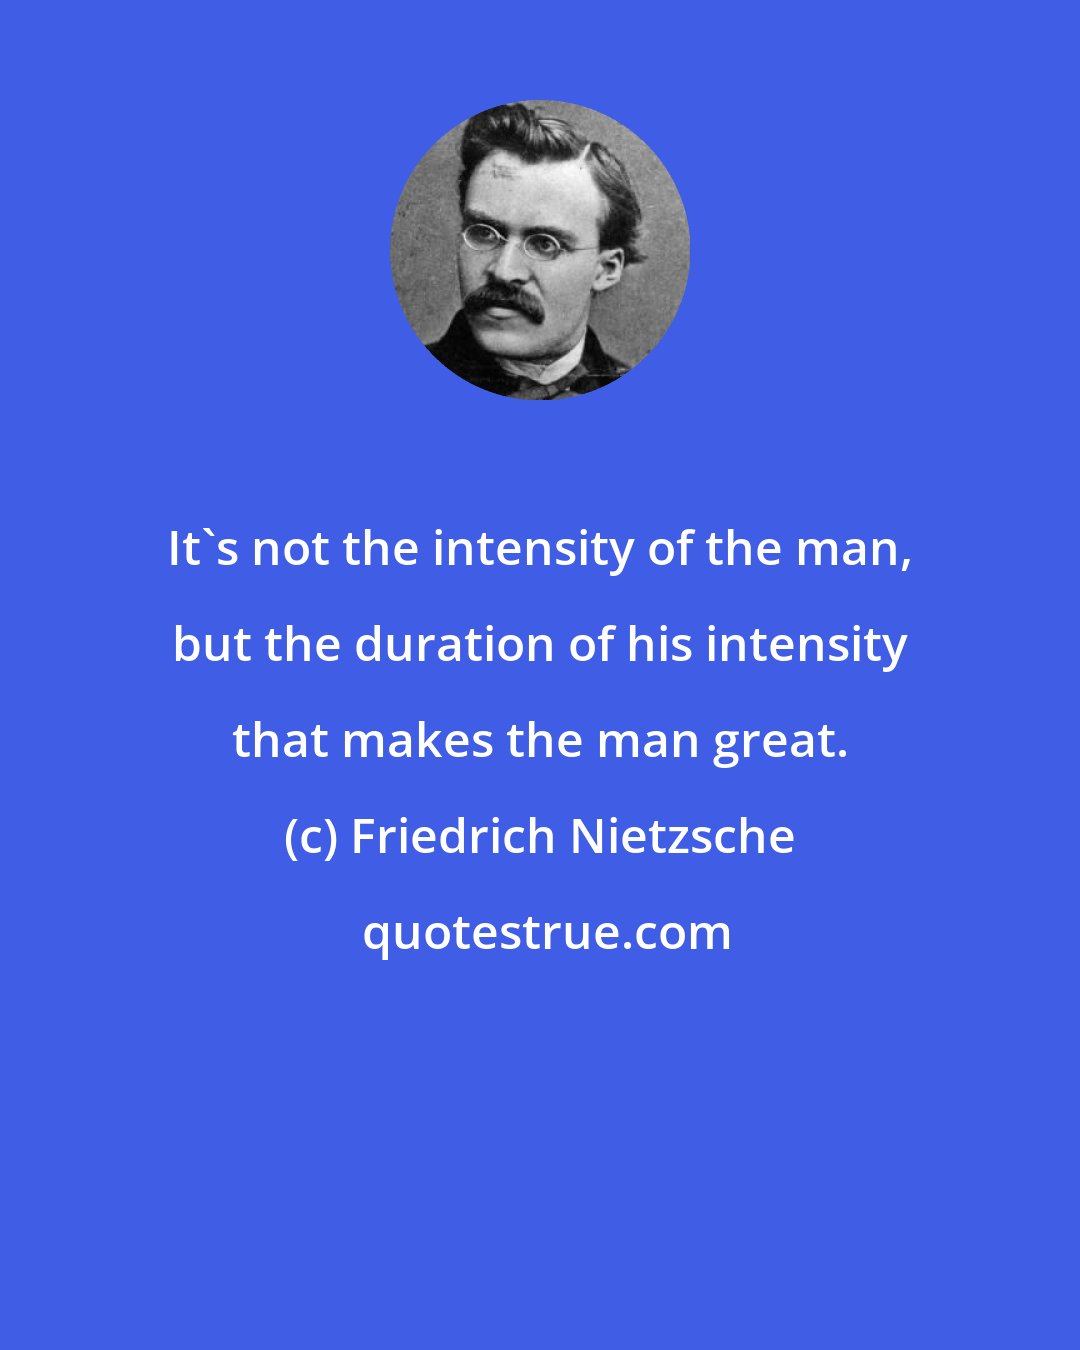 Friedrich Nietzsche: It's not the intensity of the man, but the duration of his intensity that makes the man great.